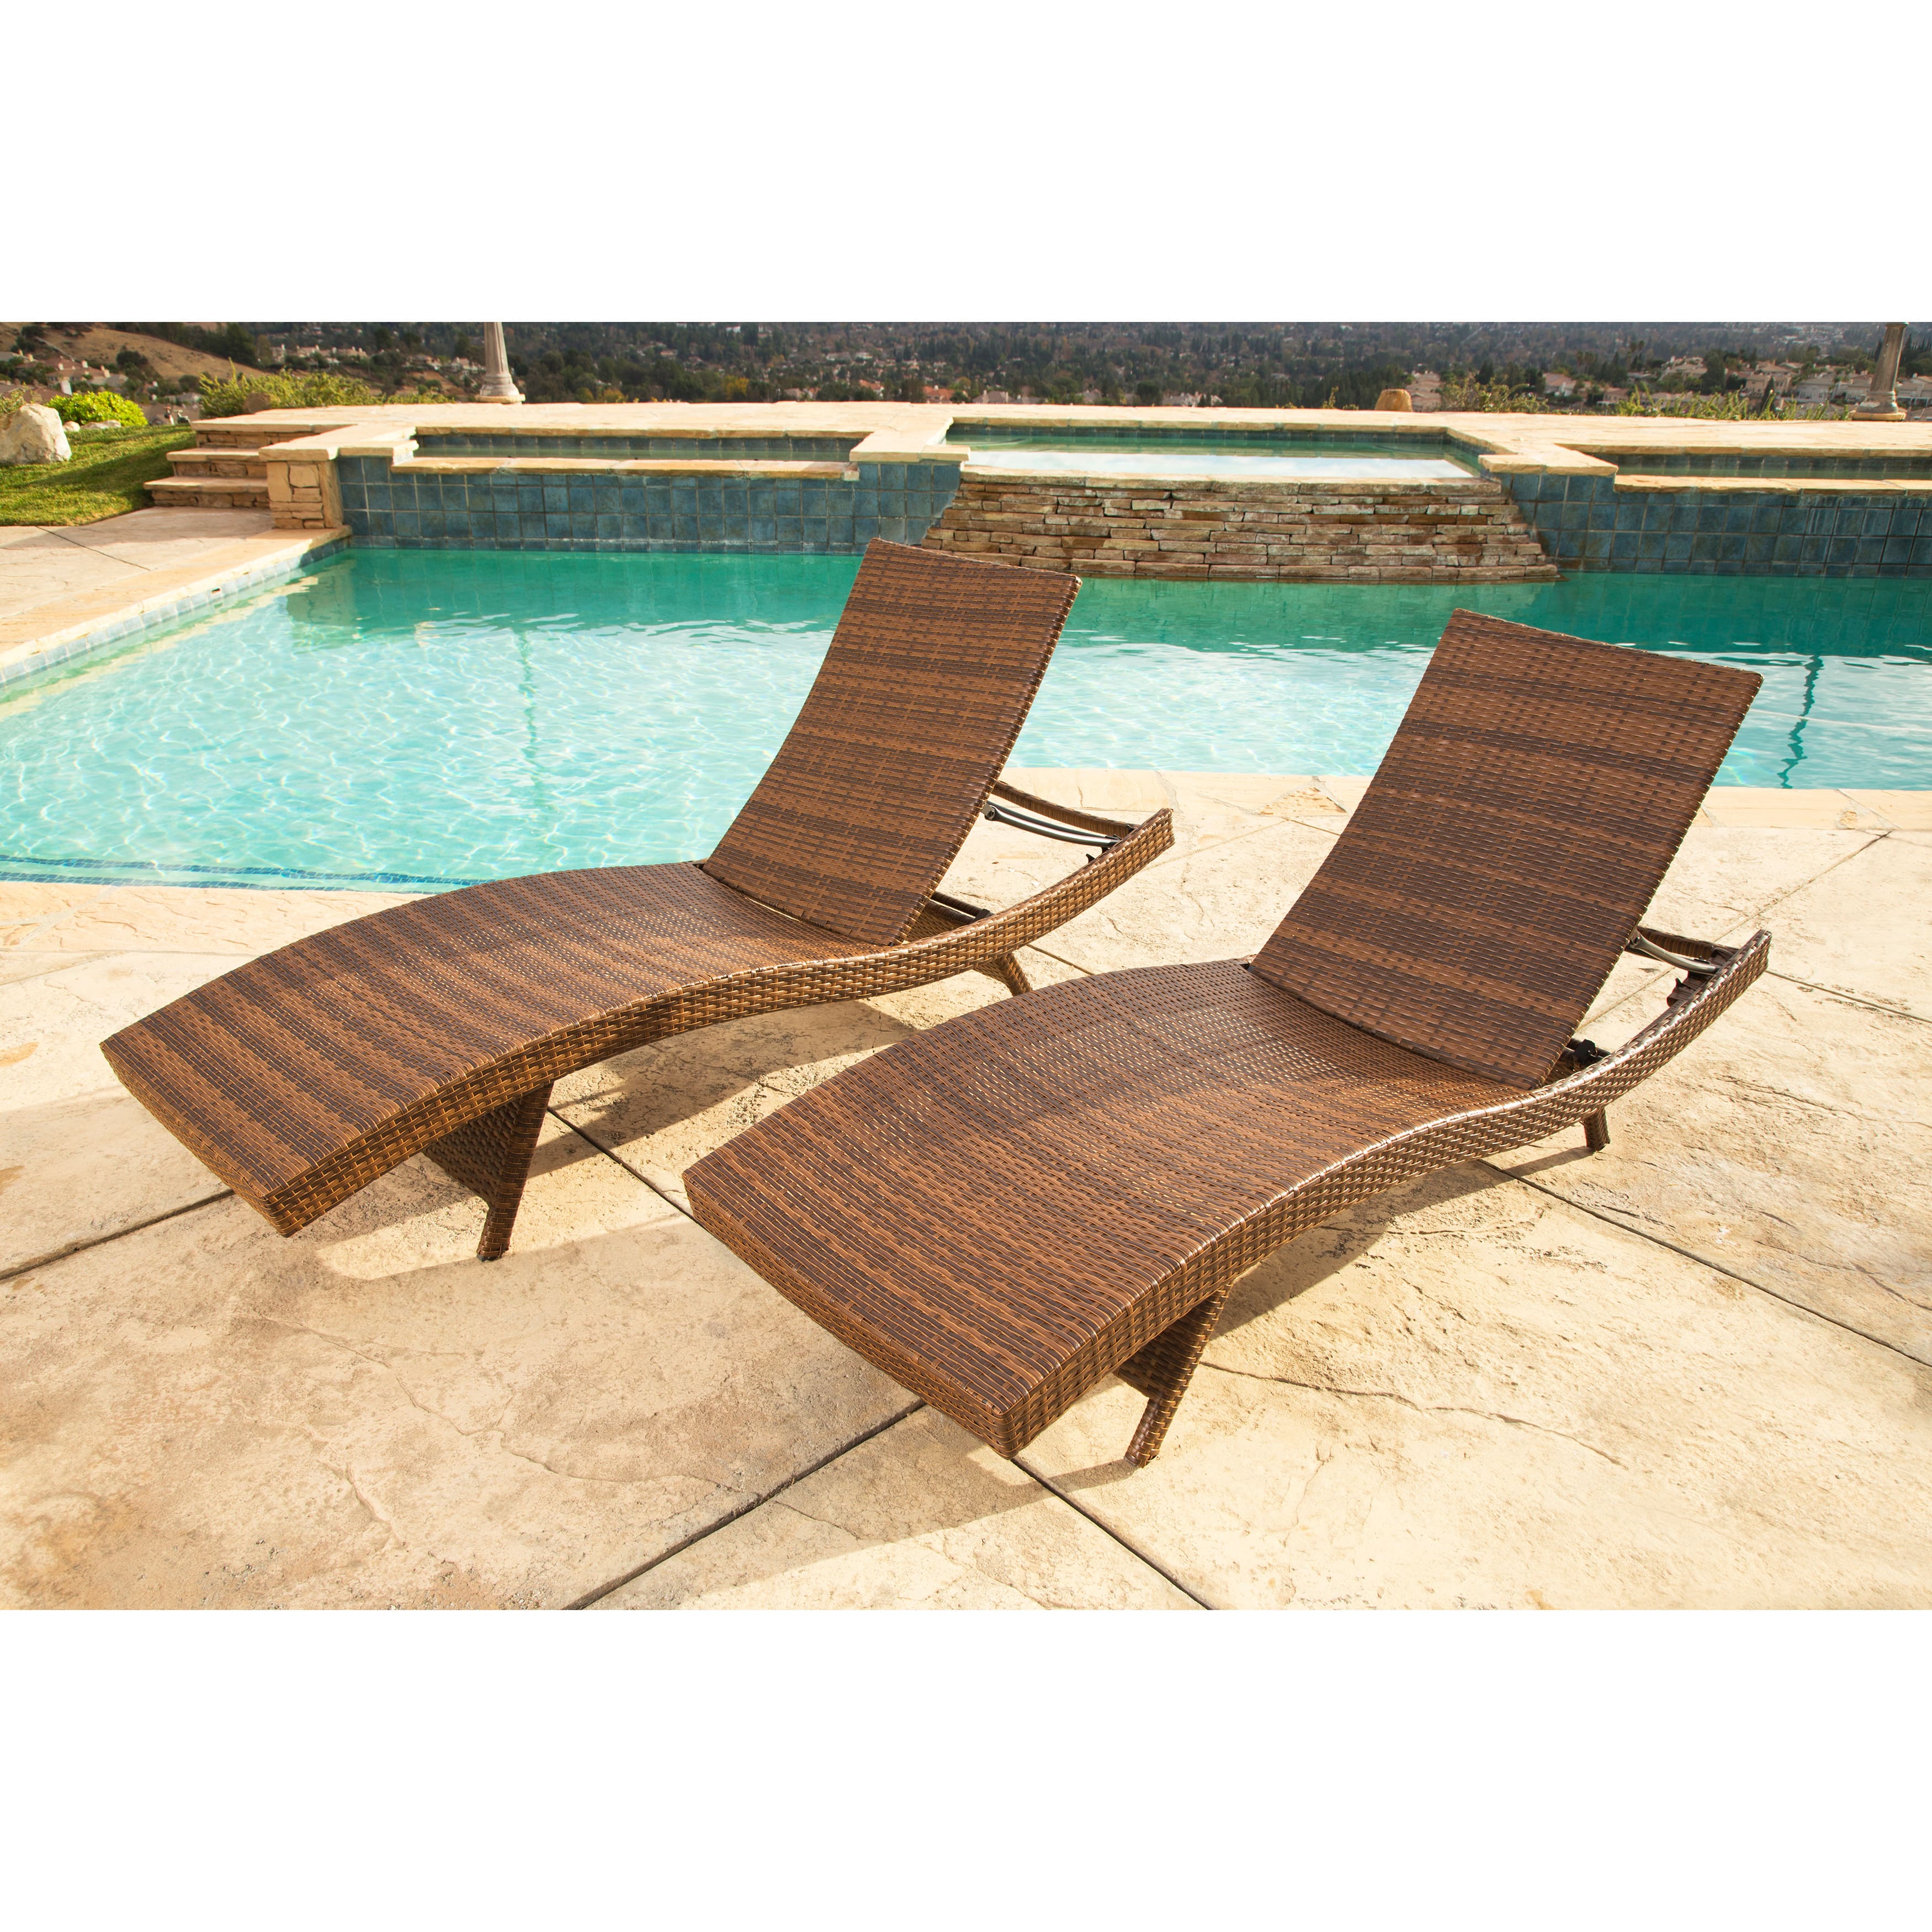 Buy Outdoor Chaise Lounges Online at Overstock.com | Our Best Patio